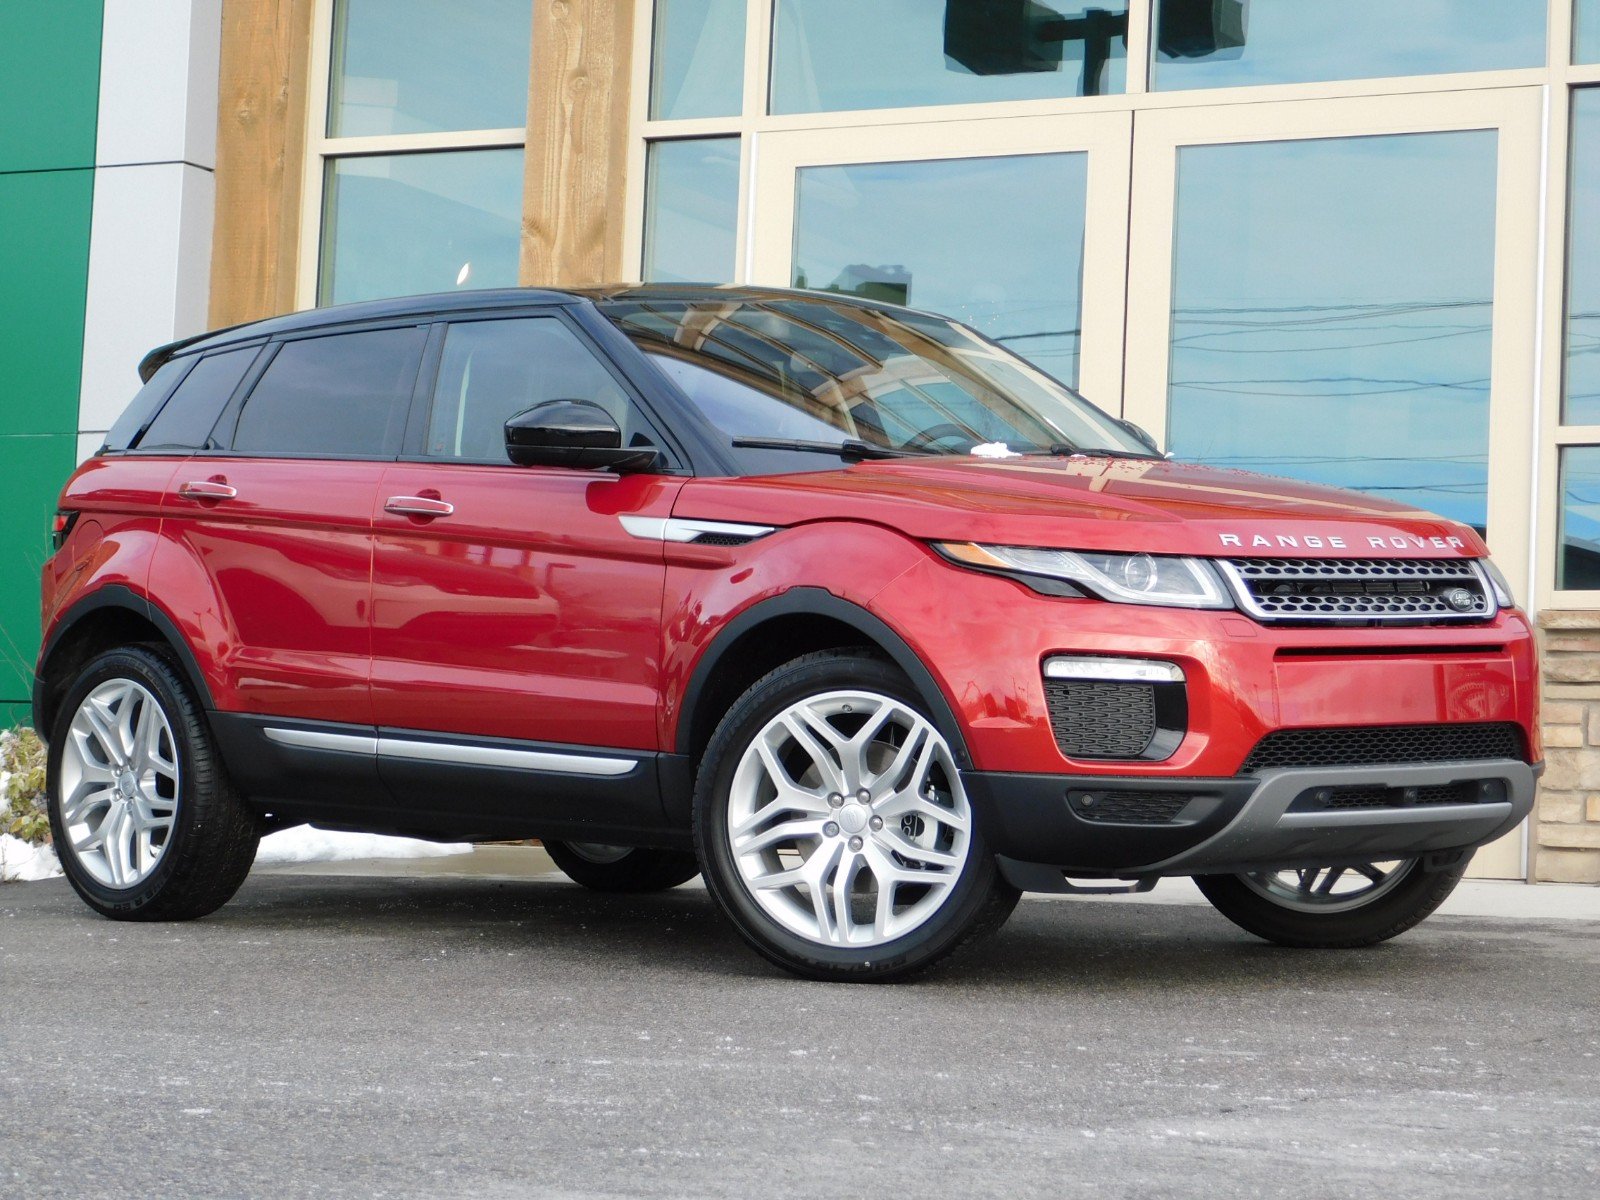 New Land Rover Range Rover Evoque Hse With Navigation 4wd